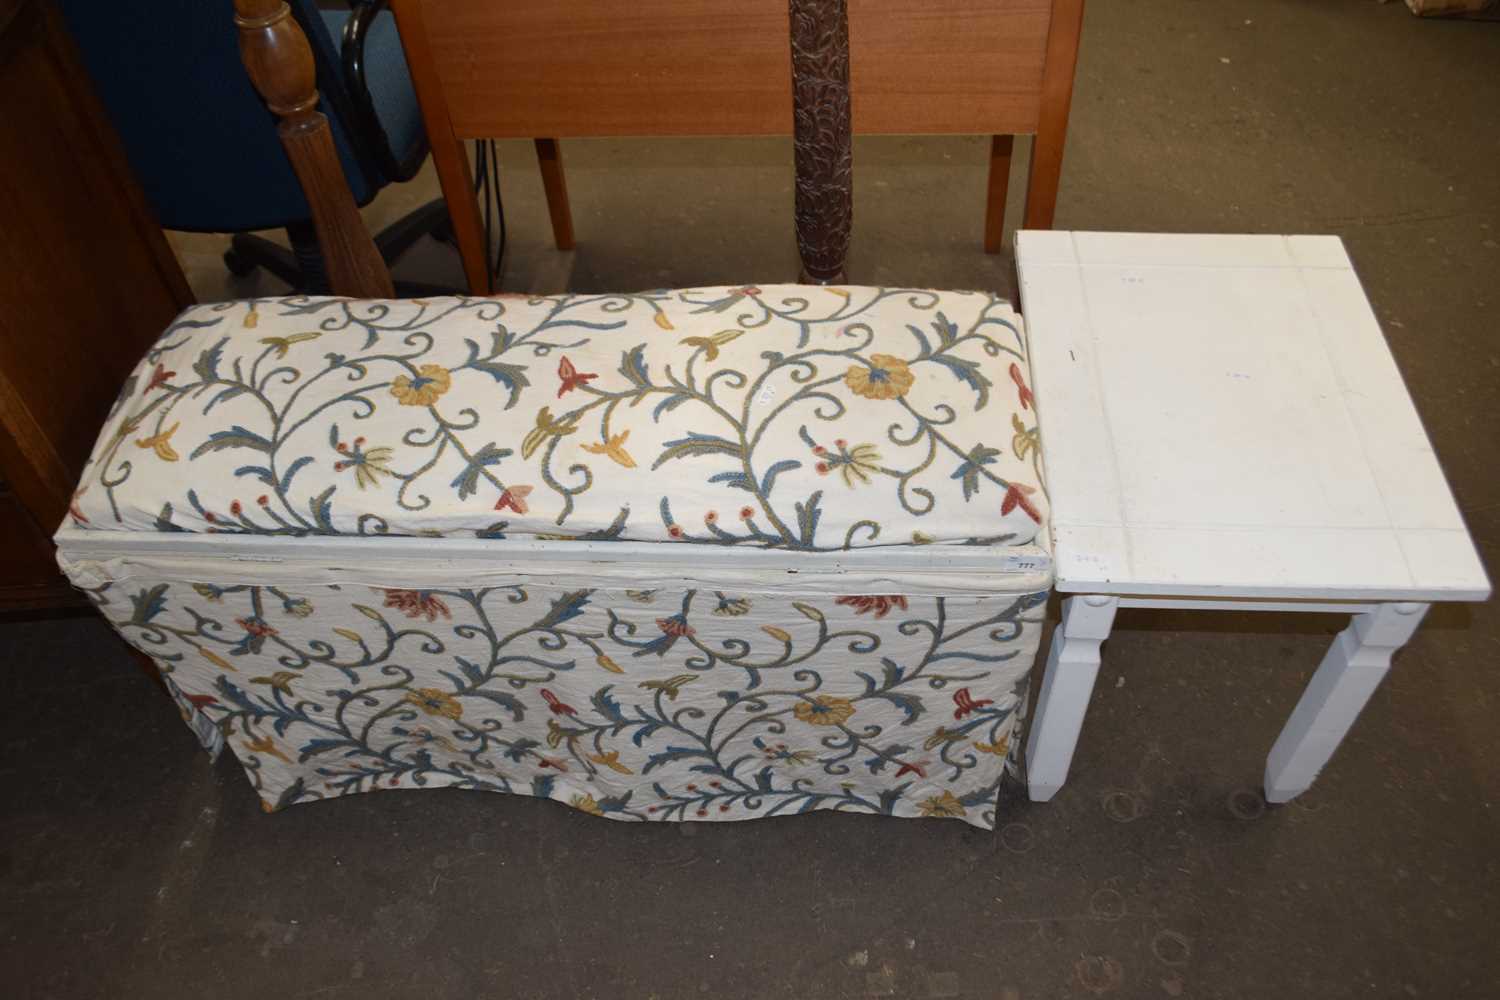 Storage stool with hinged lid and crewl work upholstered cover together with a white painted